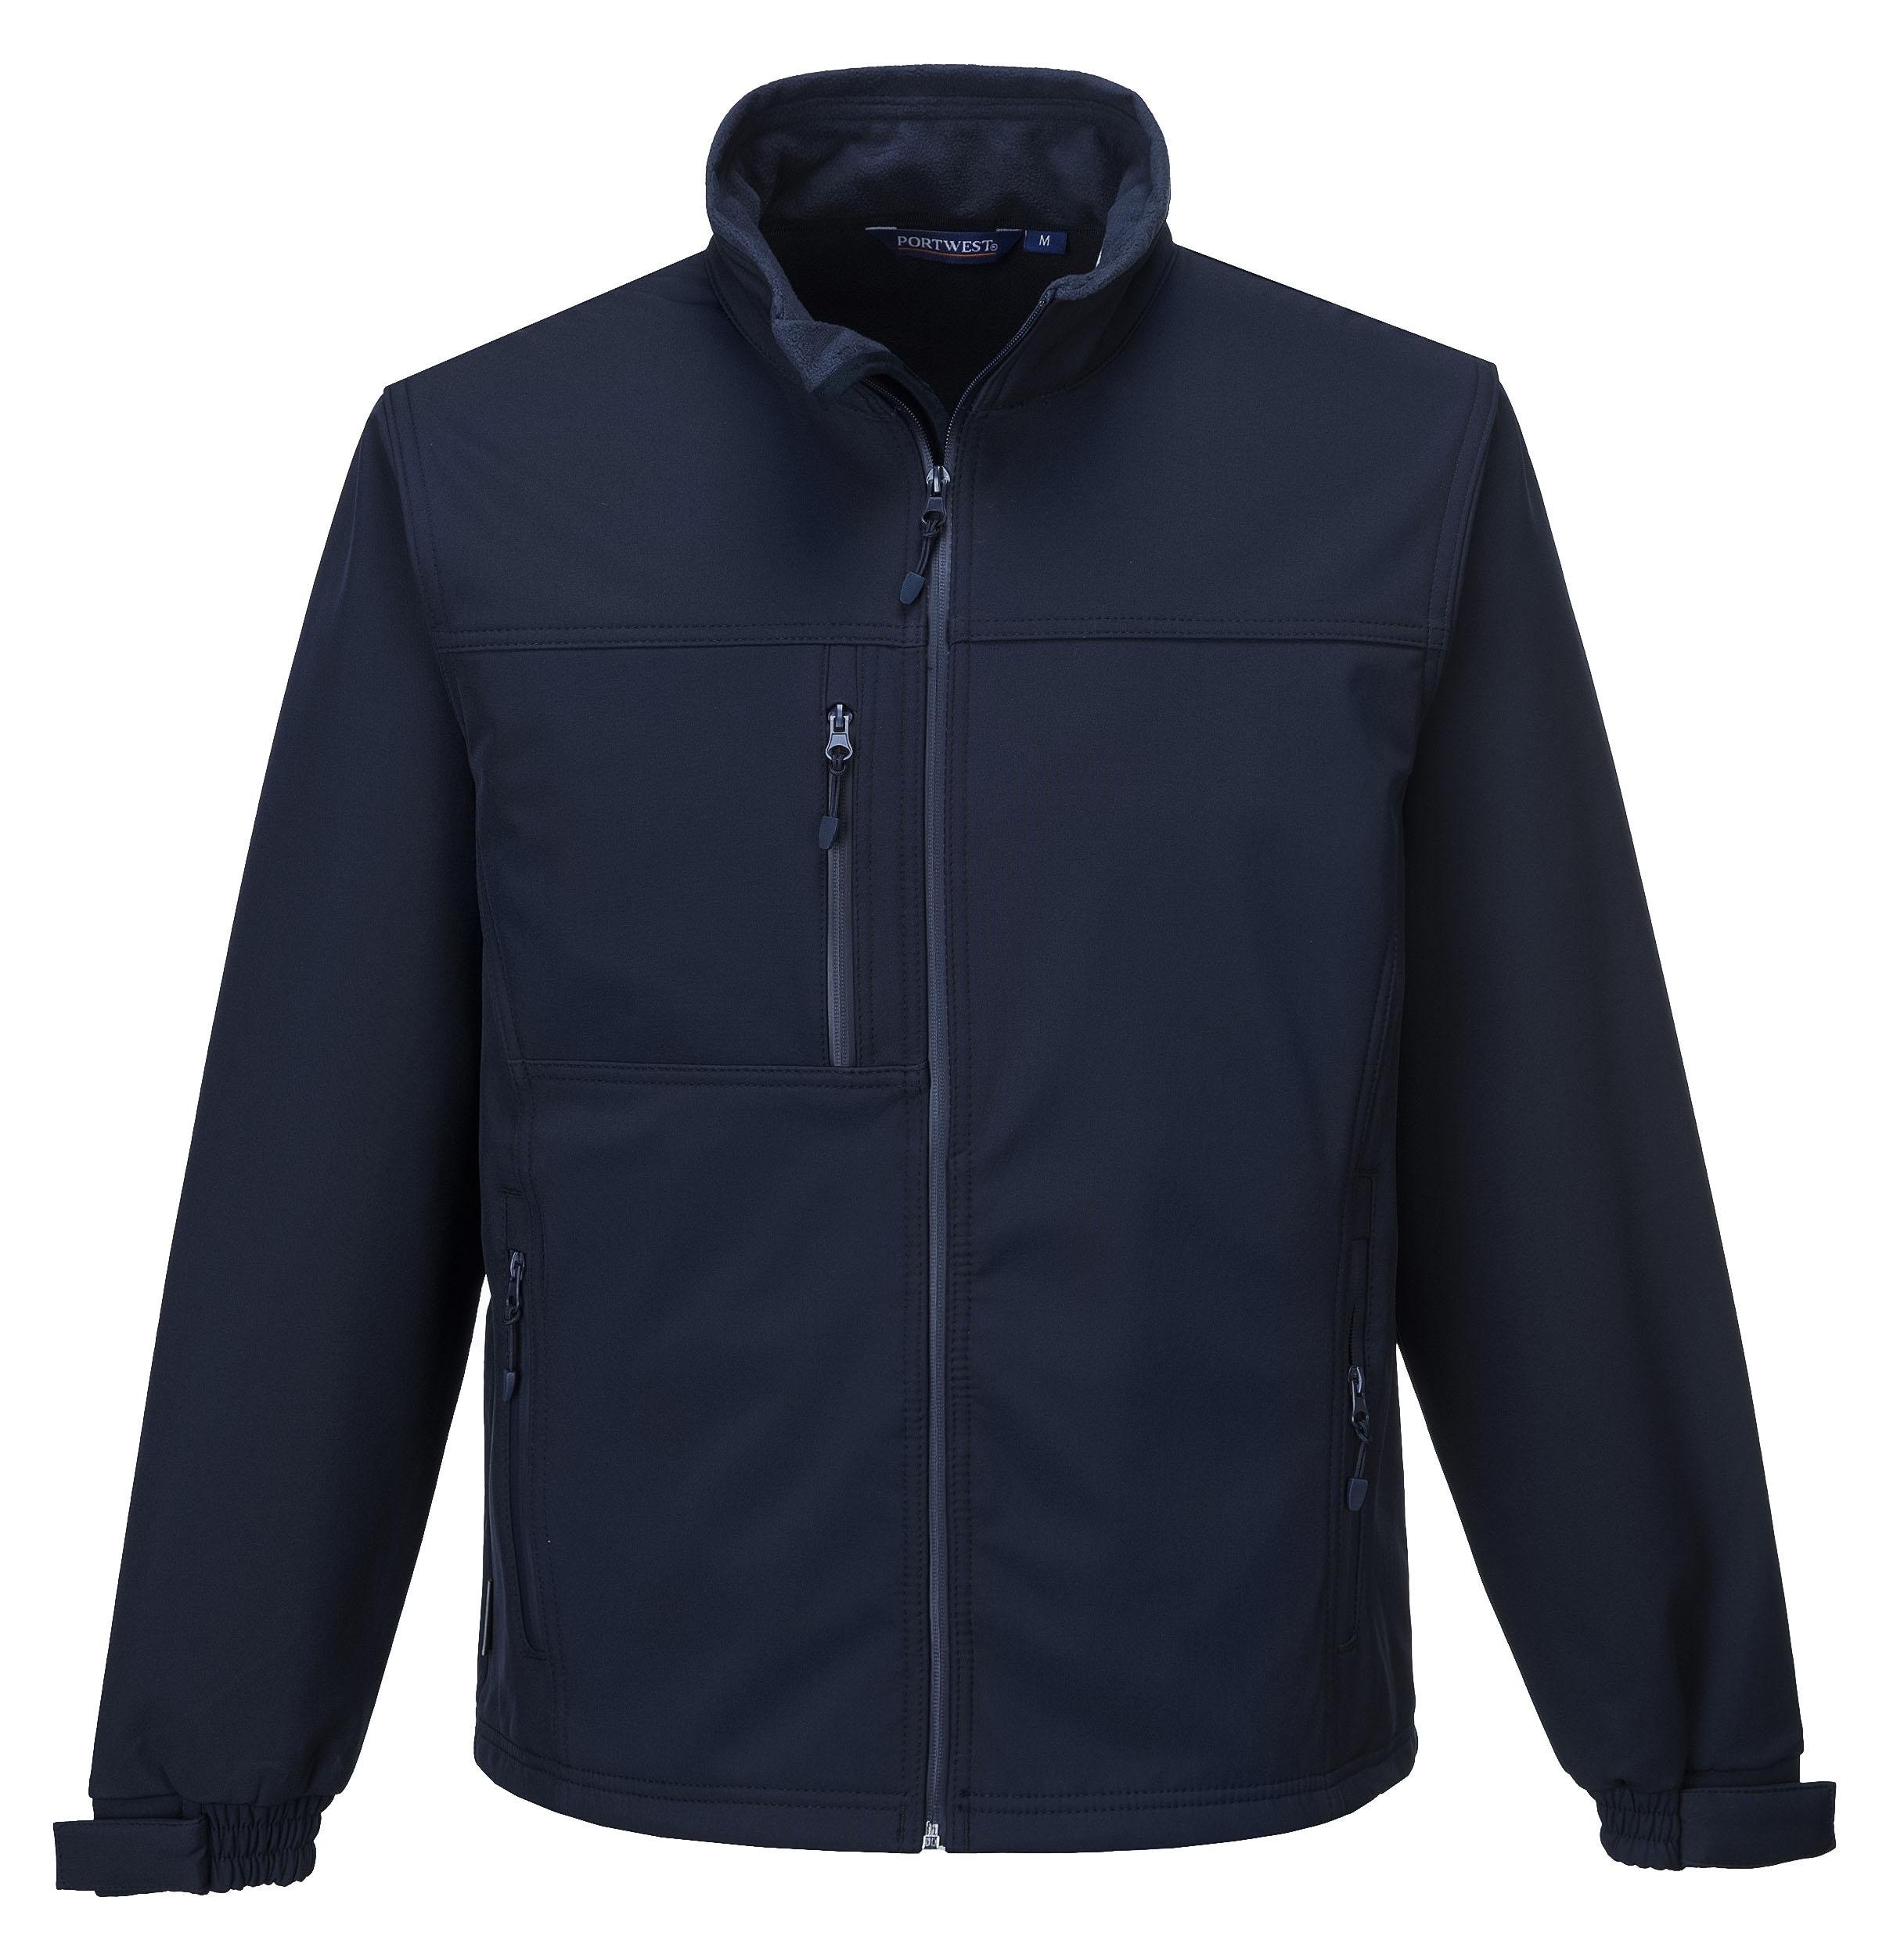 ax-httpss3.eu-west-2.amazonaws.comwebsystemstmp_for_downloadportwest-softshell-jacket-navy.jpeg